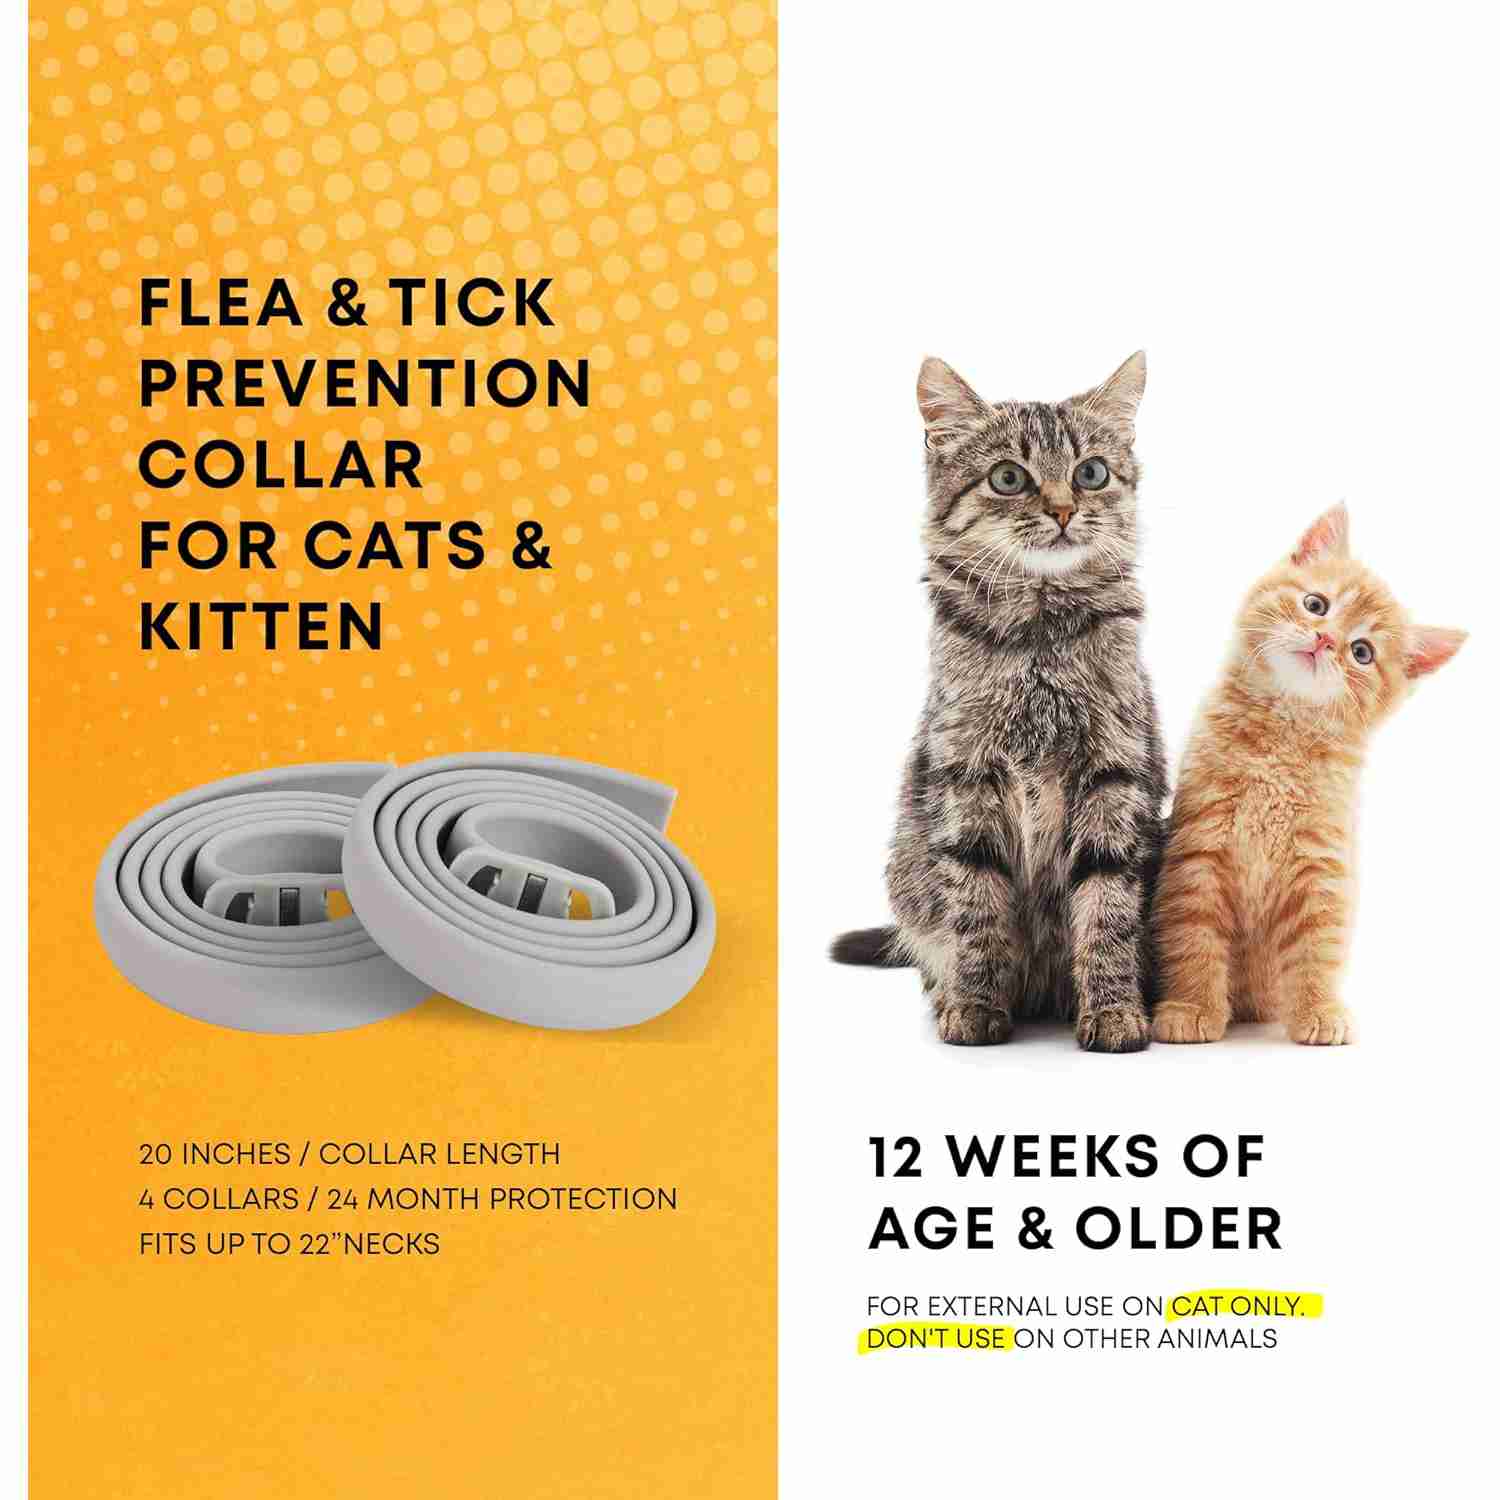 flea-and-tick-prevention-for-kittens for cheap